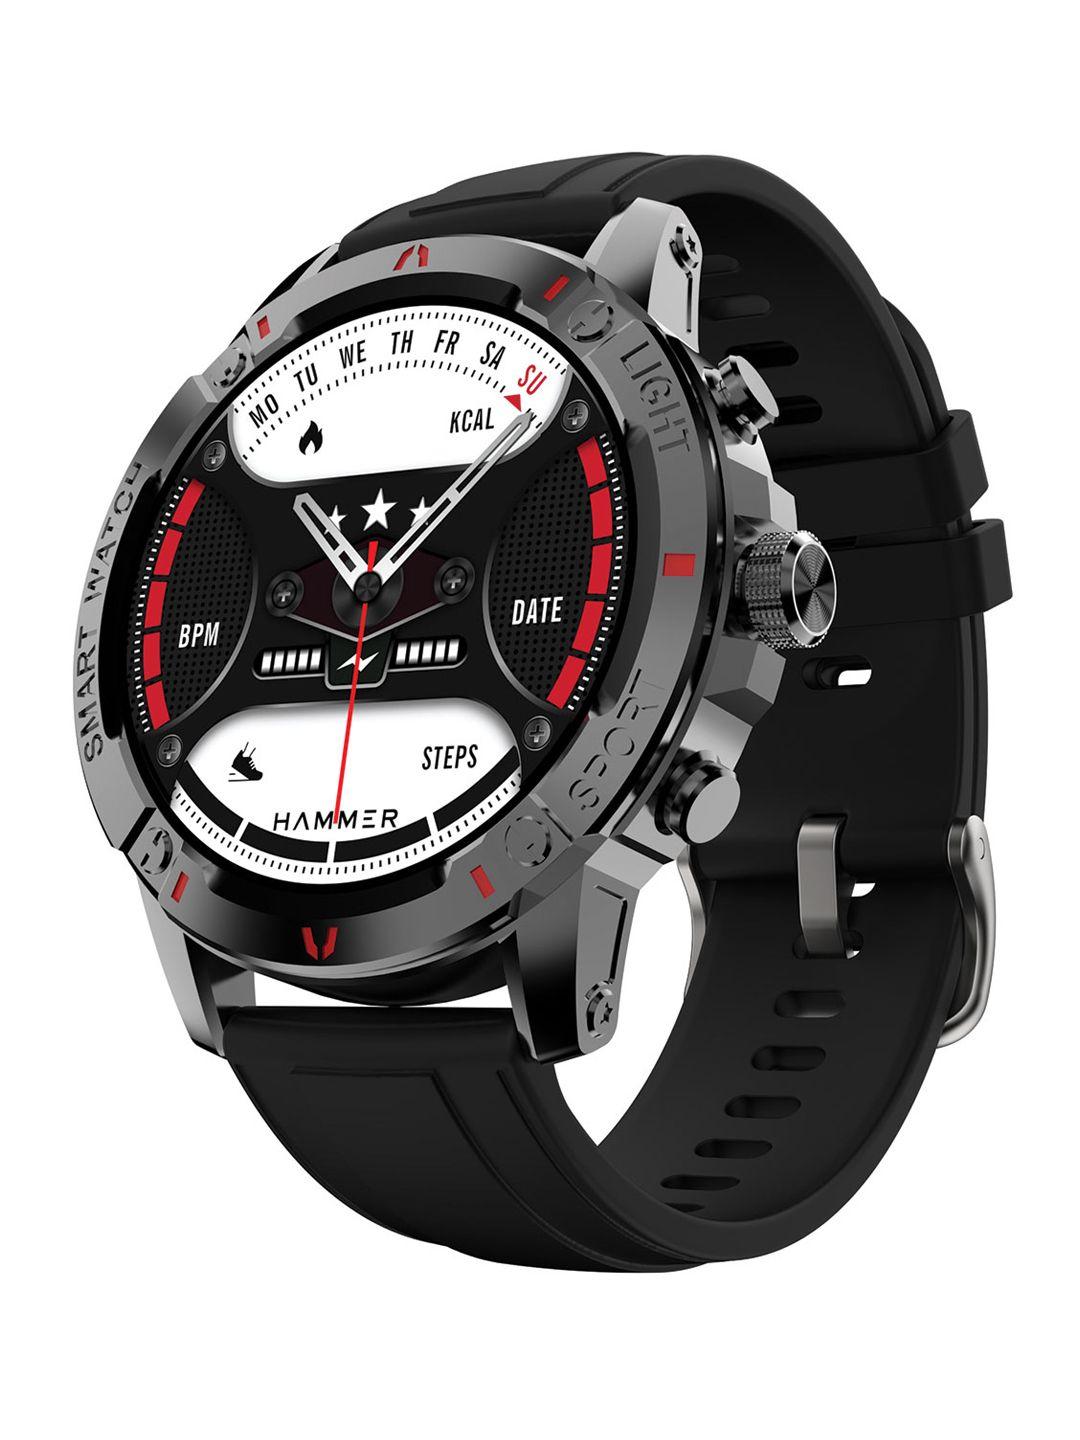 hammer-black-luxor-1.45"-amoled-display-smart-watch-with-round-dial,-bluetooth-calling